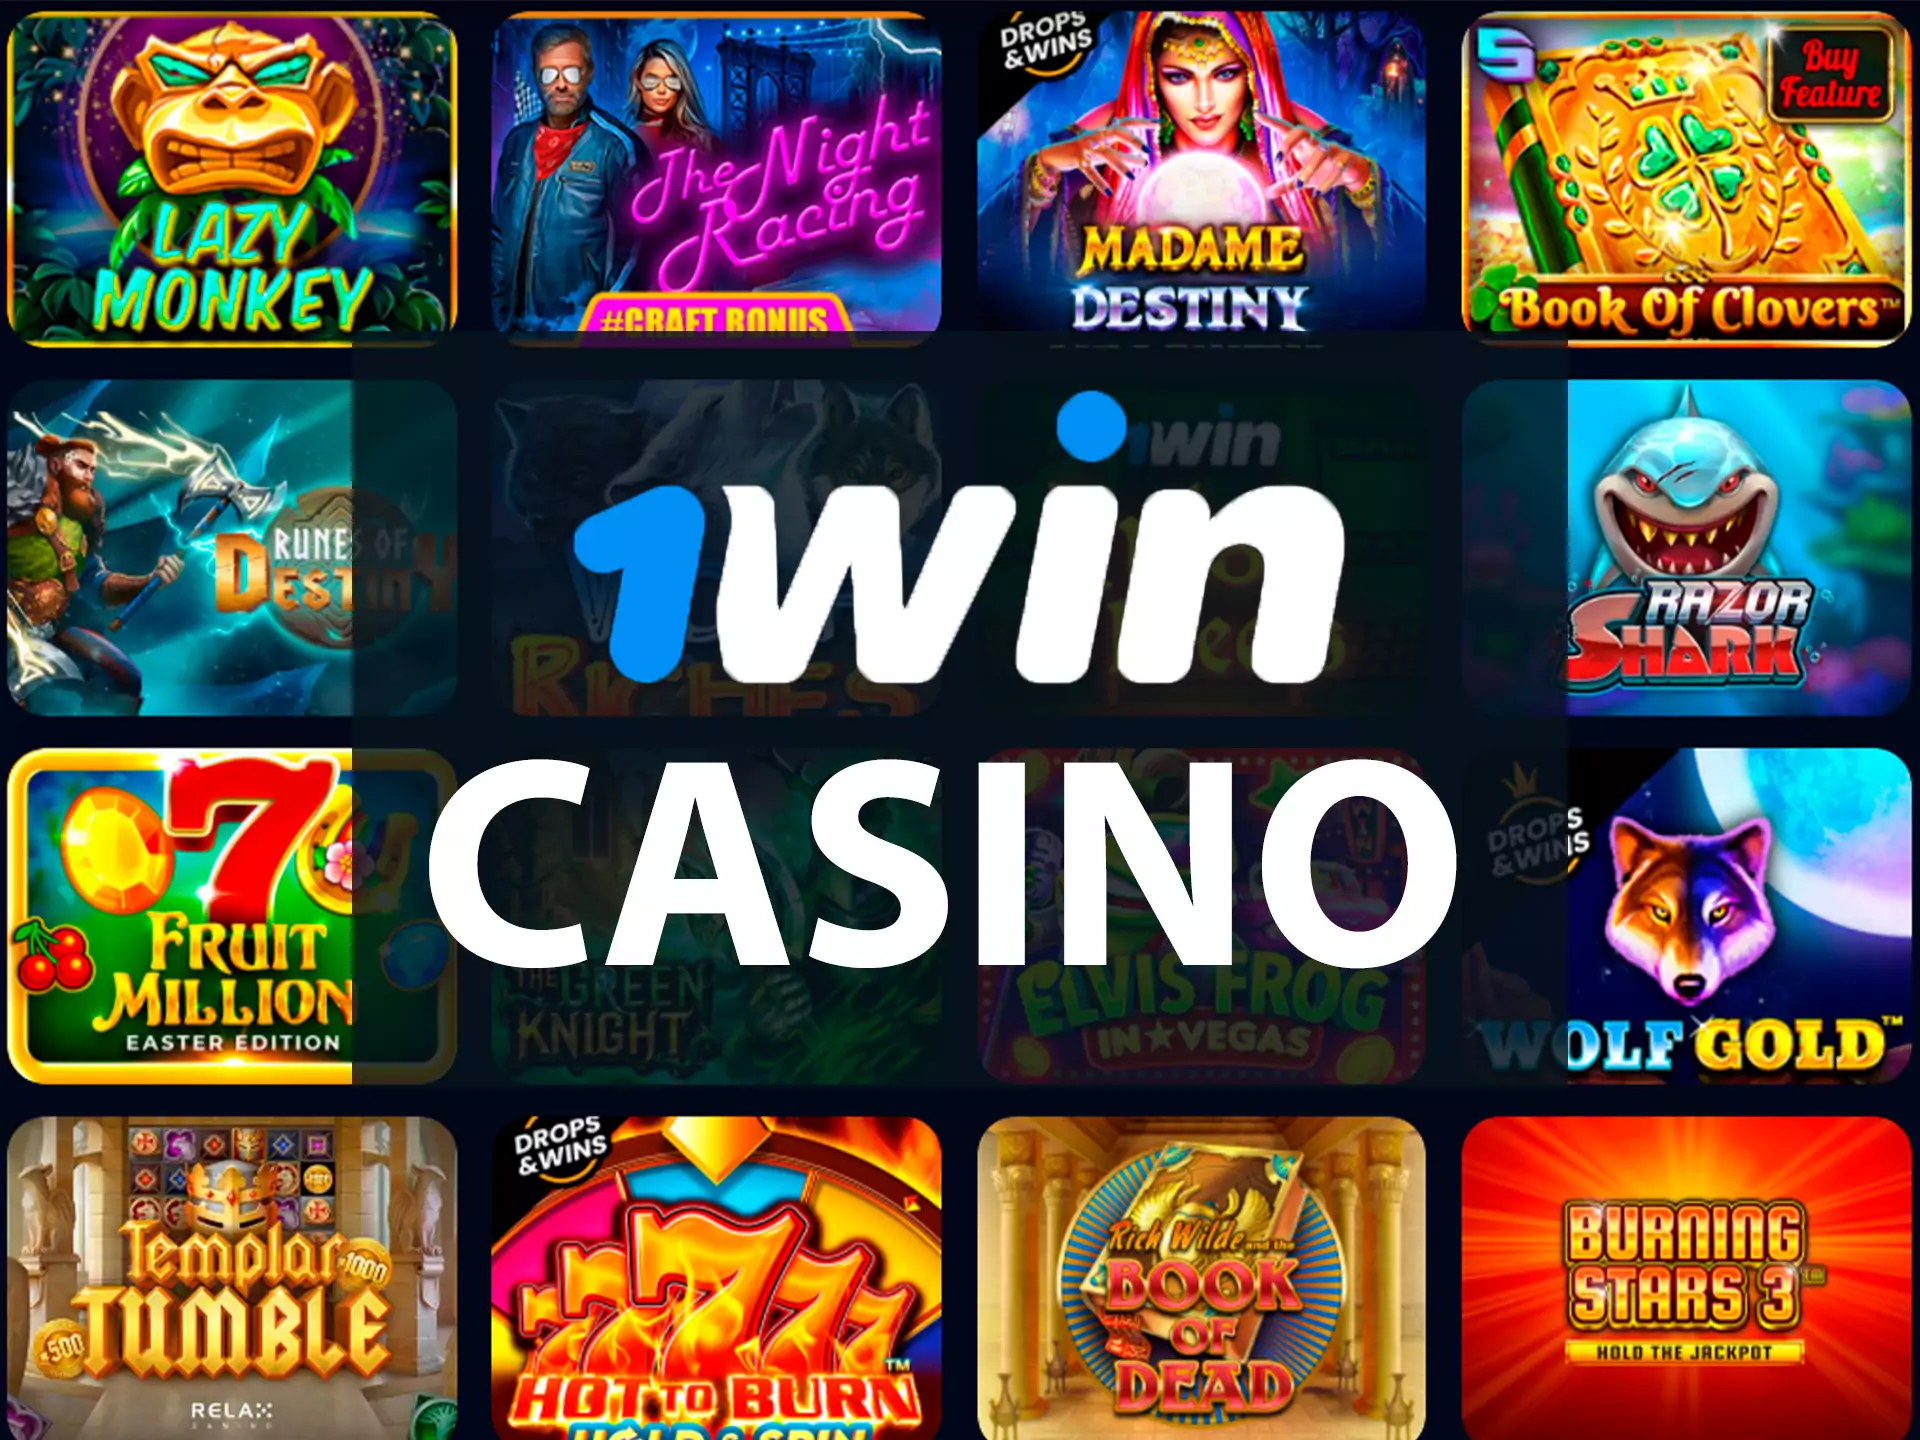 1win offers many online casino games.